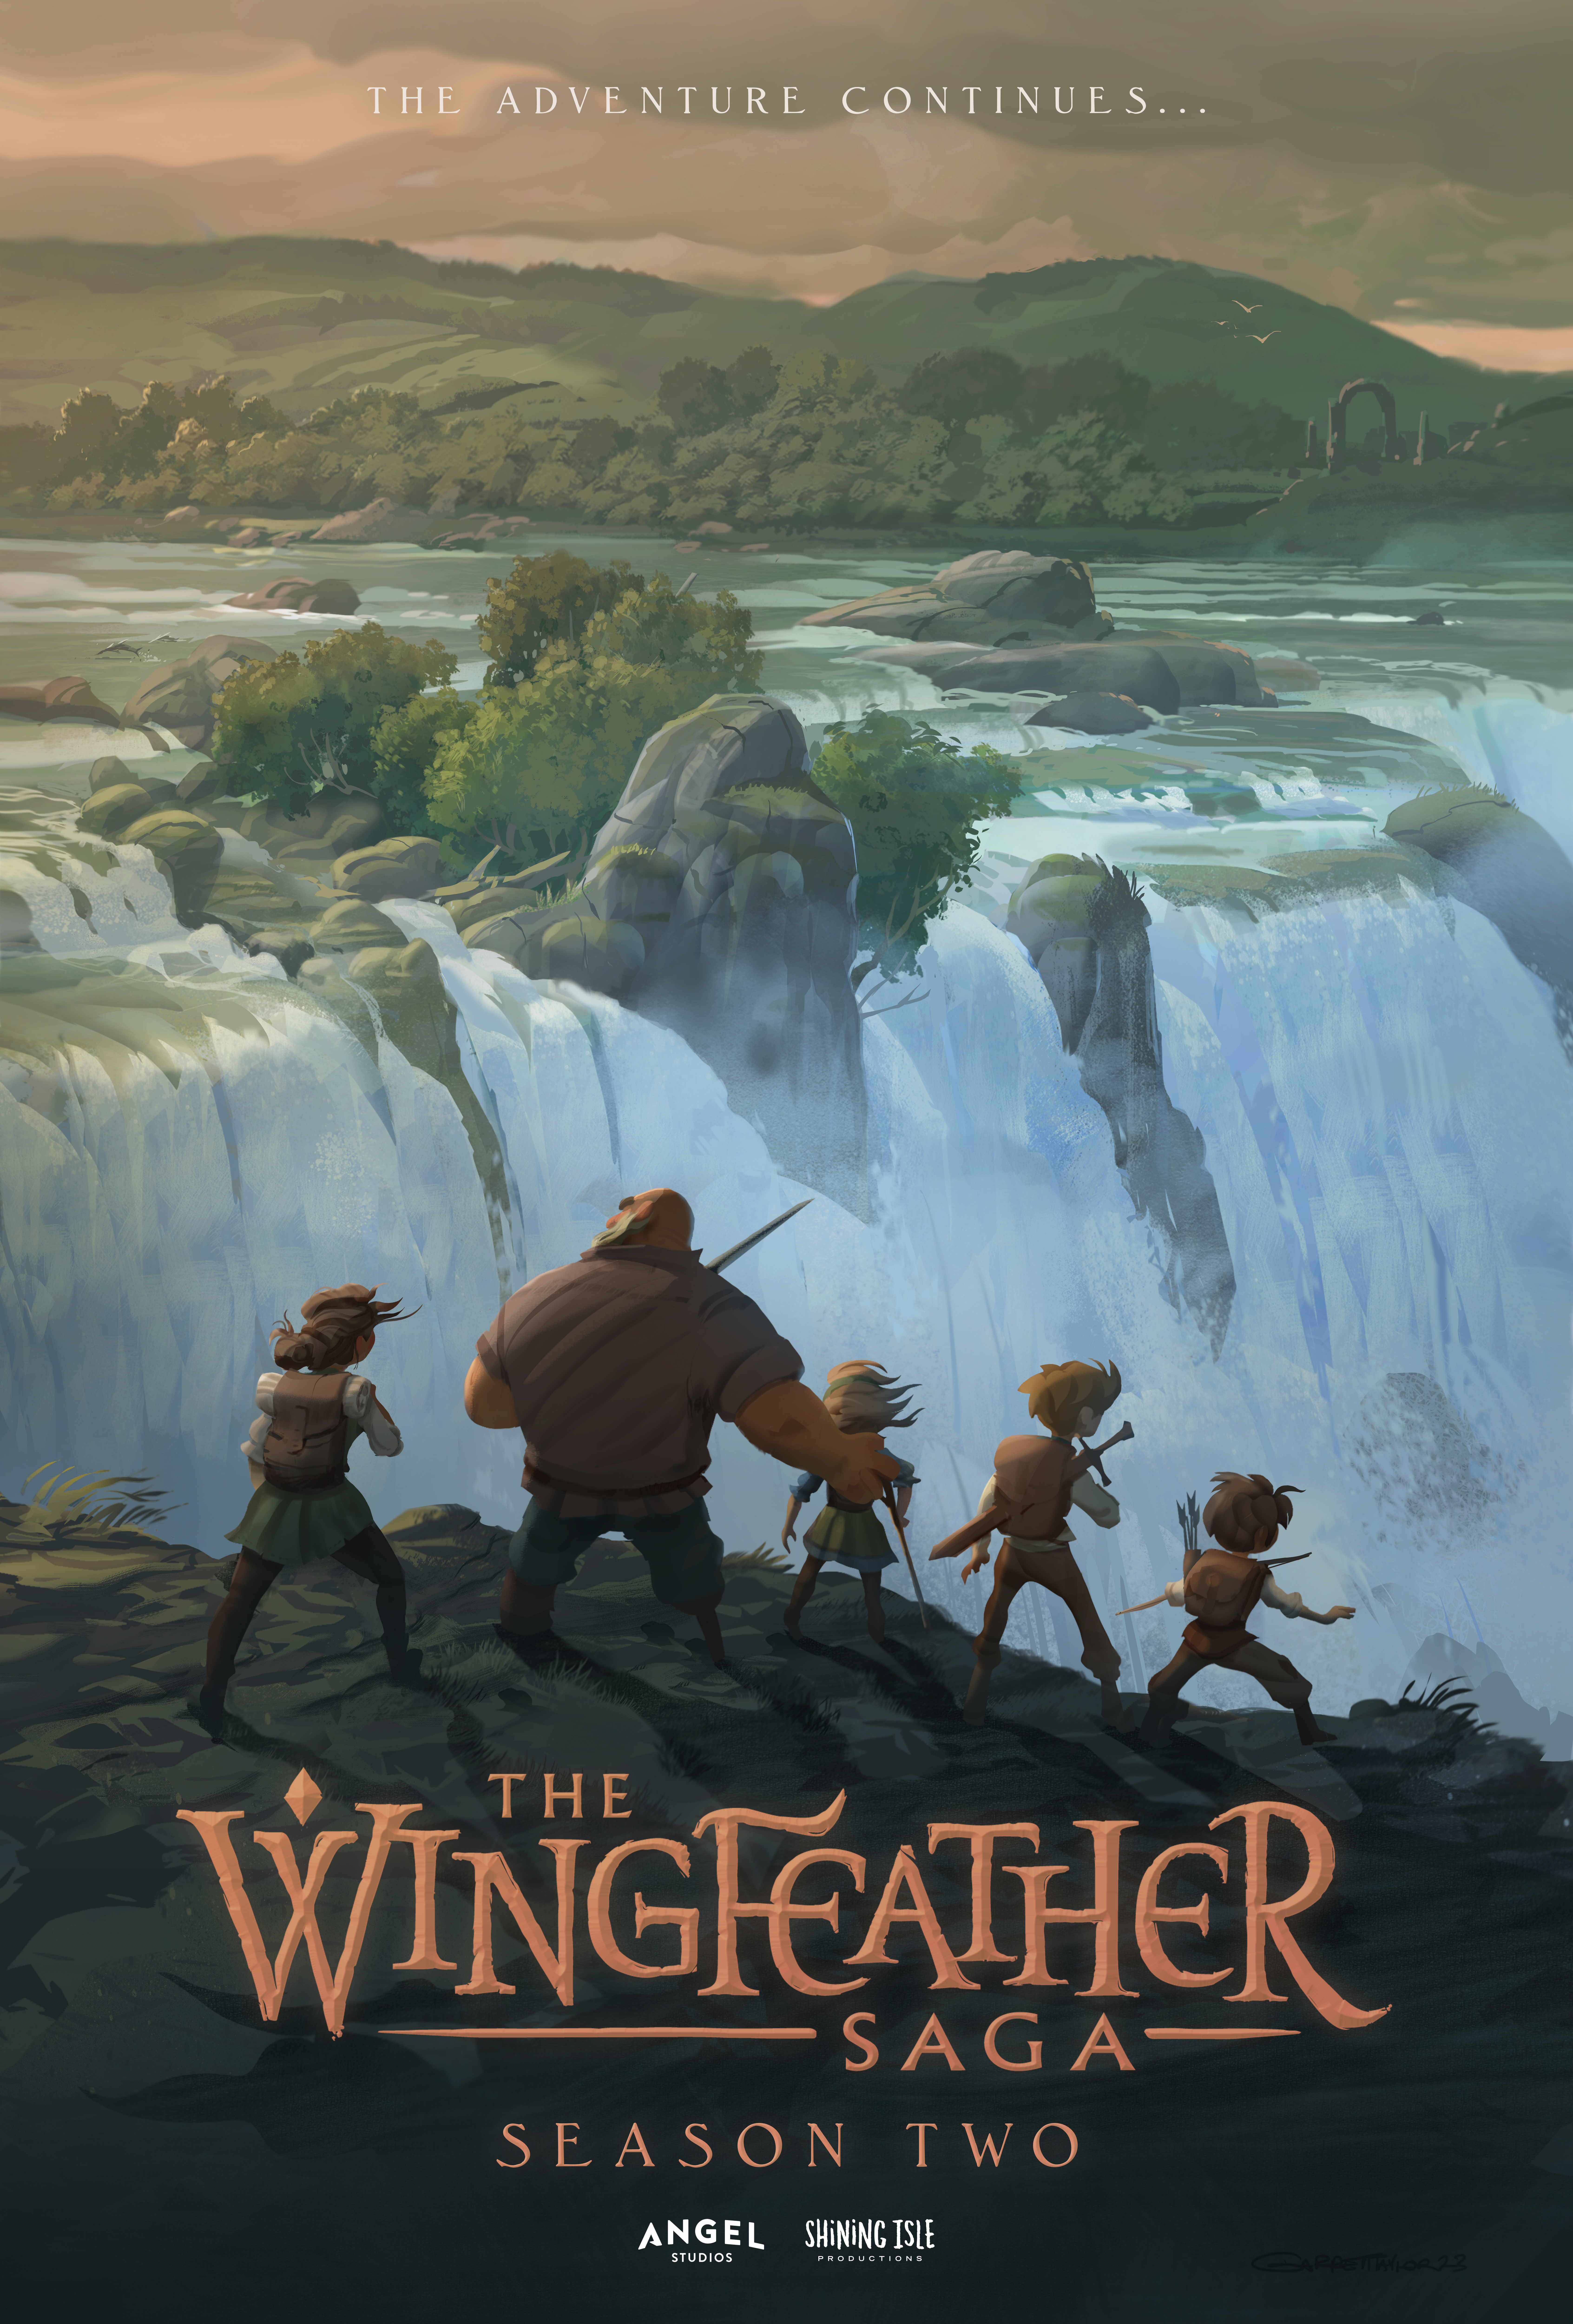 Phone wallpaper featuring The Wingfeather Saga Season Two with characters overlooking a majestic waterfall landscape, perfect for fans of the series.